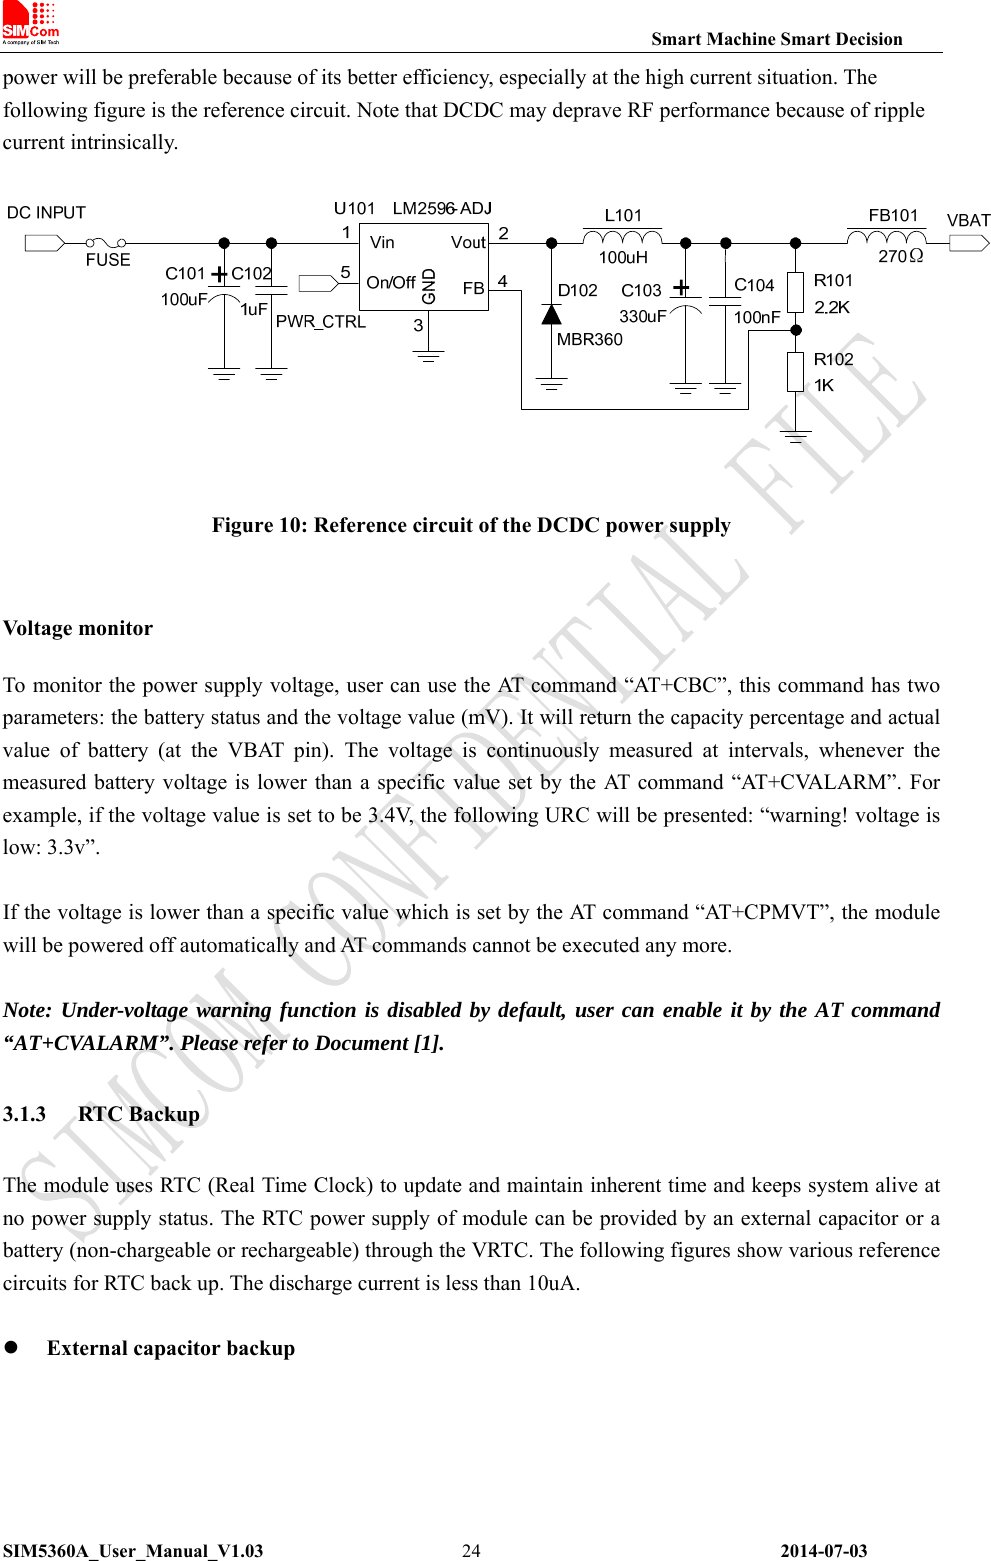                                                                Smart Machine Smart Decision SIM5360A_User_Manual_V1.03                 2014-07-03 24power will be preferable because of its better efficiency, especially at the high current situation. The following figure is the reference circuit. Note that DCDC may deprave RF performance because of ripple current intrinsically.   Figure 10: Reference circuit of the DCDC power supply  Volta ge monito r To monitor the power supply voltage, user can use the AT command “AT+CBC”, this command has two parameters: the battery status and the voltage value (mV). It will return the capacity percentage and actual value  of  battery  (at  the  VBAT  pin).  The  voltage  is  continuously  measured  at  intervals,  whenever  the measured battery voltage is lower than a specific value set  by the AT command “AT+CVALARM”. For example, if the voltage value is set to be 3.4V, the following URC will be presented: “warning! voltage is low: 3.3v”.  If the voltage is lower than a specific value which is set by the AT command “AT+CPMVT”, the module will be powered off automatically and AT commands cannot be executed any more.  Note: Under-voltage warning function is disabled by default, user can enable it by the AT command “AT+CVALARM”. Please refer to Document [1]. 3.1.3 RTC Backup The module uses RTC (Real Time Clock) to update and maintain inherent time and keeps system alive at no power supply status. The RTC power supply of module can be provided by an external capacitor or a battery (non-chargeable or rechargeable) through the VRTC. The following figures show various reference circuits for RTC back up. The discharge current is less than 10uA.     External capacitor backup 